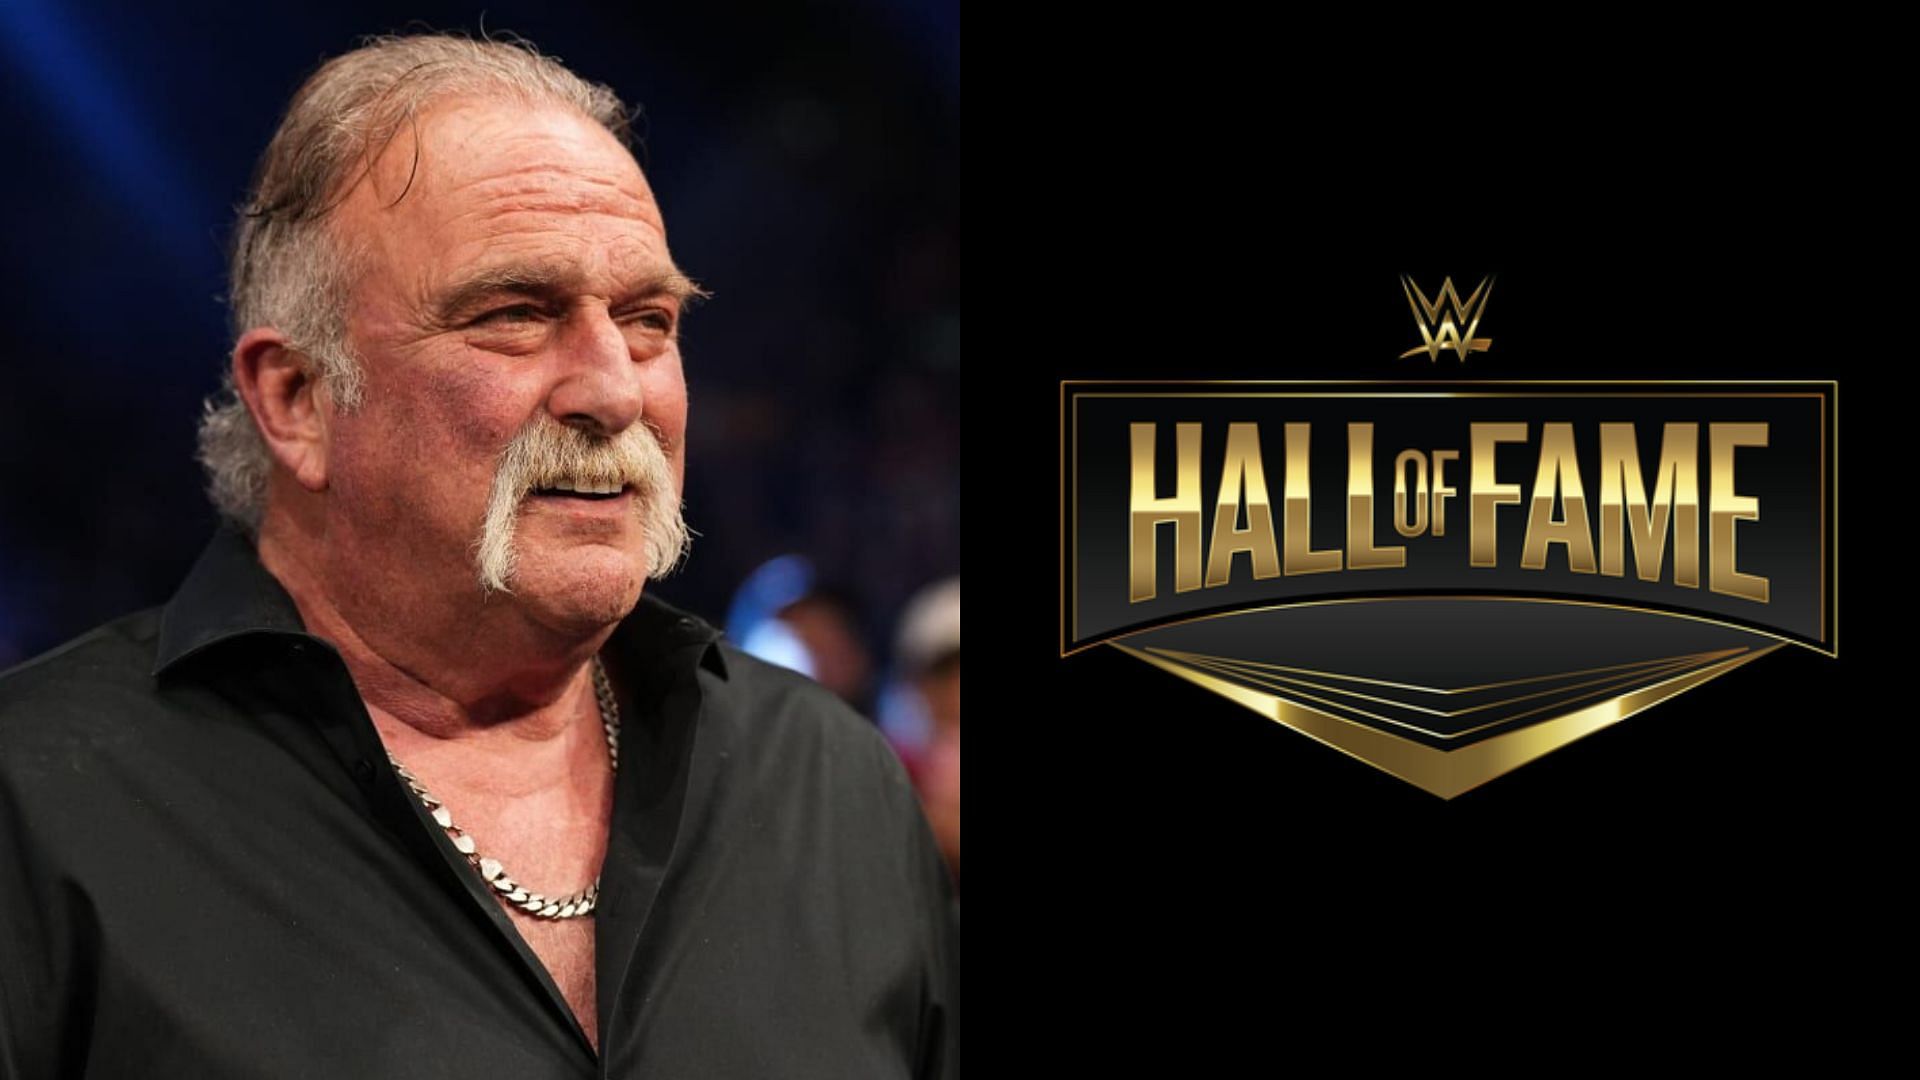 Jake Roberts is known as one of the most prominent WWE legends